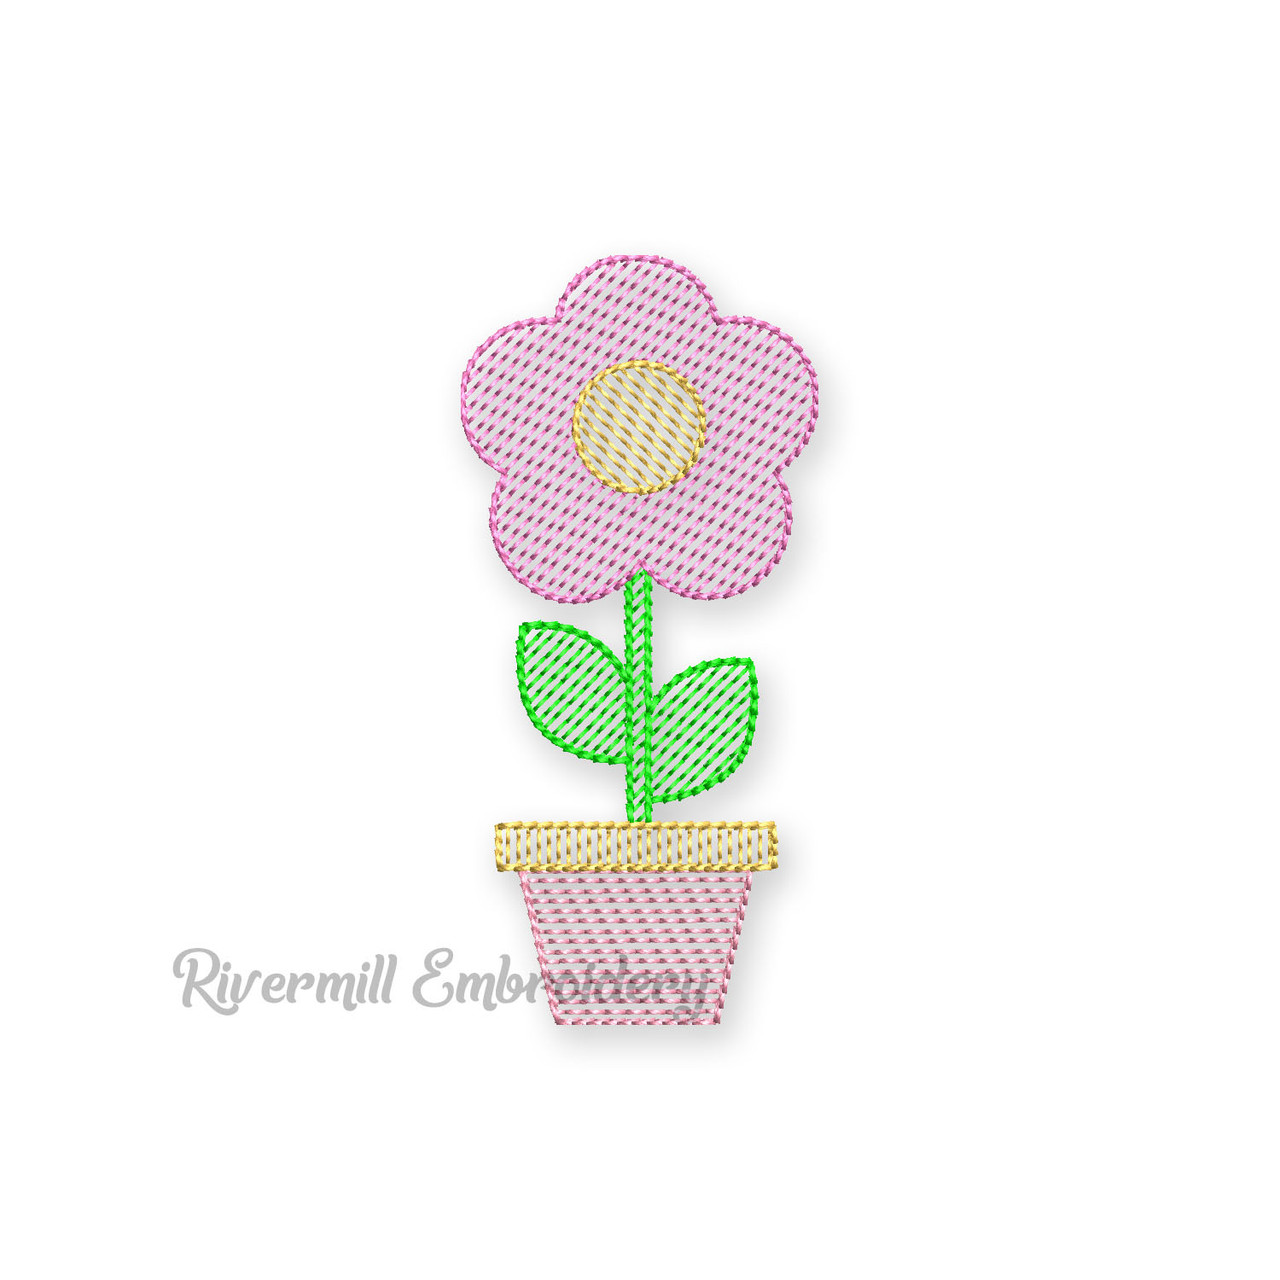 Applique Flower Machine Embroidery Design - Rivermill Embroidery